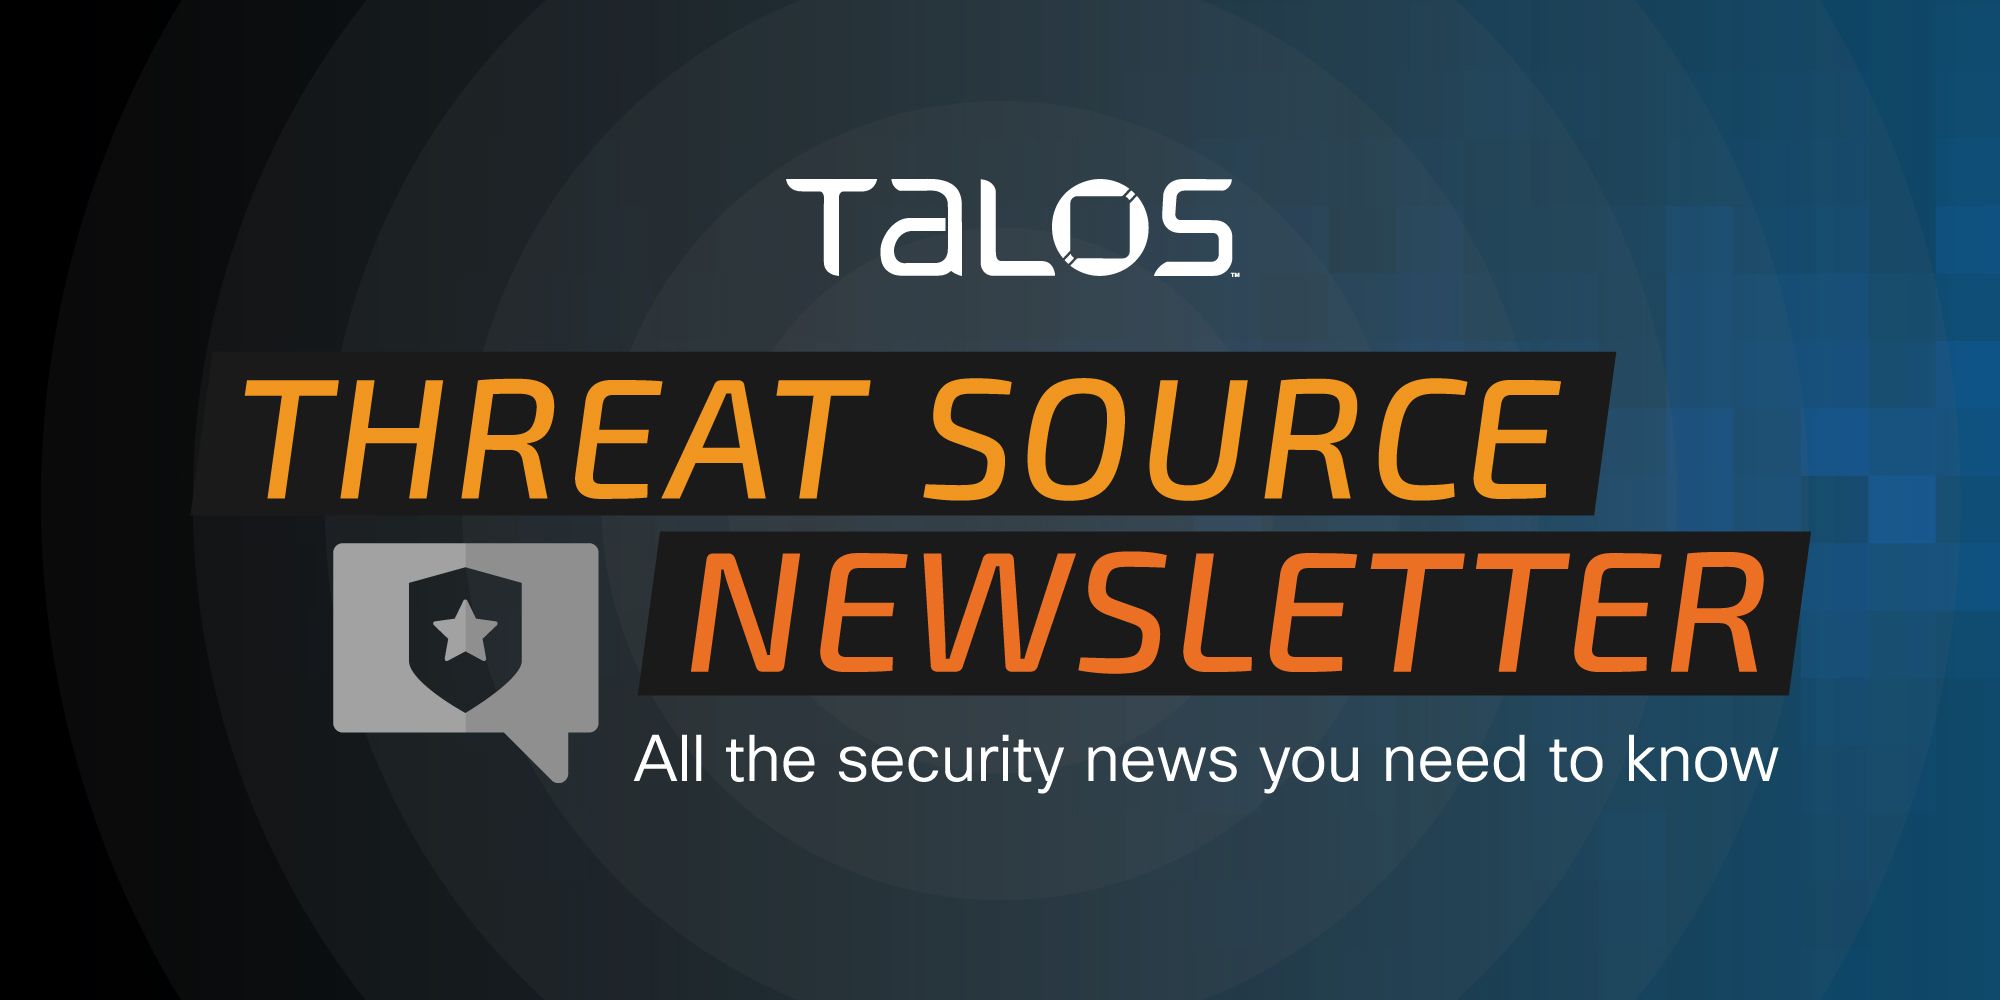 Threat Source newsletter (Jan. 12, 2023): Did ChatGPT write our newsletter?